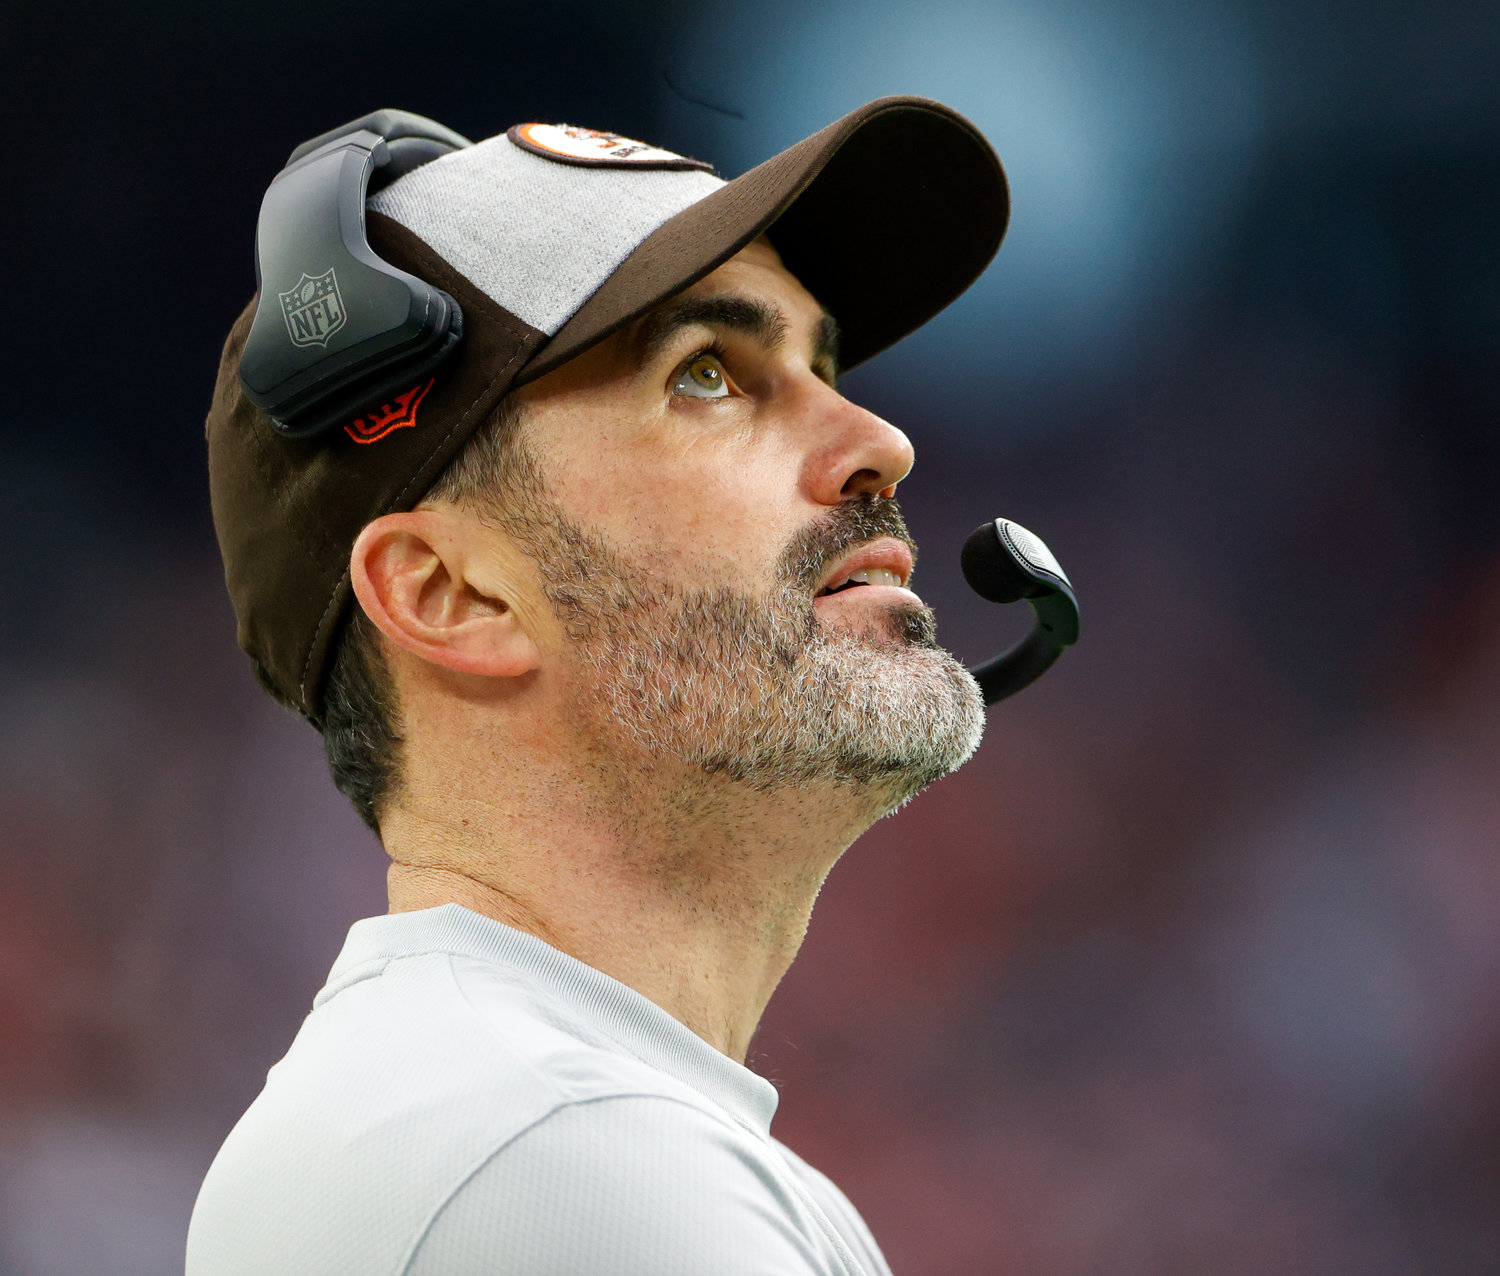 Cleveland Browns head coach Kevin Stefanski during an NFL game between the Houston Texans and the Cleveland Browns on Dec. 4, 2022, in Houston. The Browns won, 27-14.